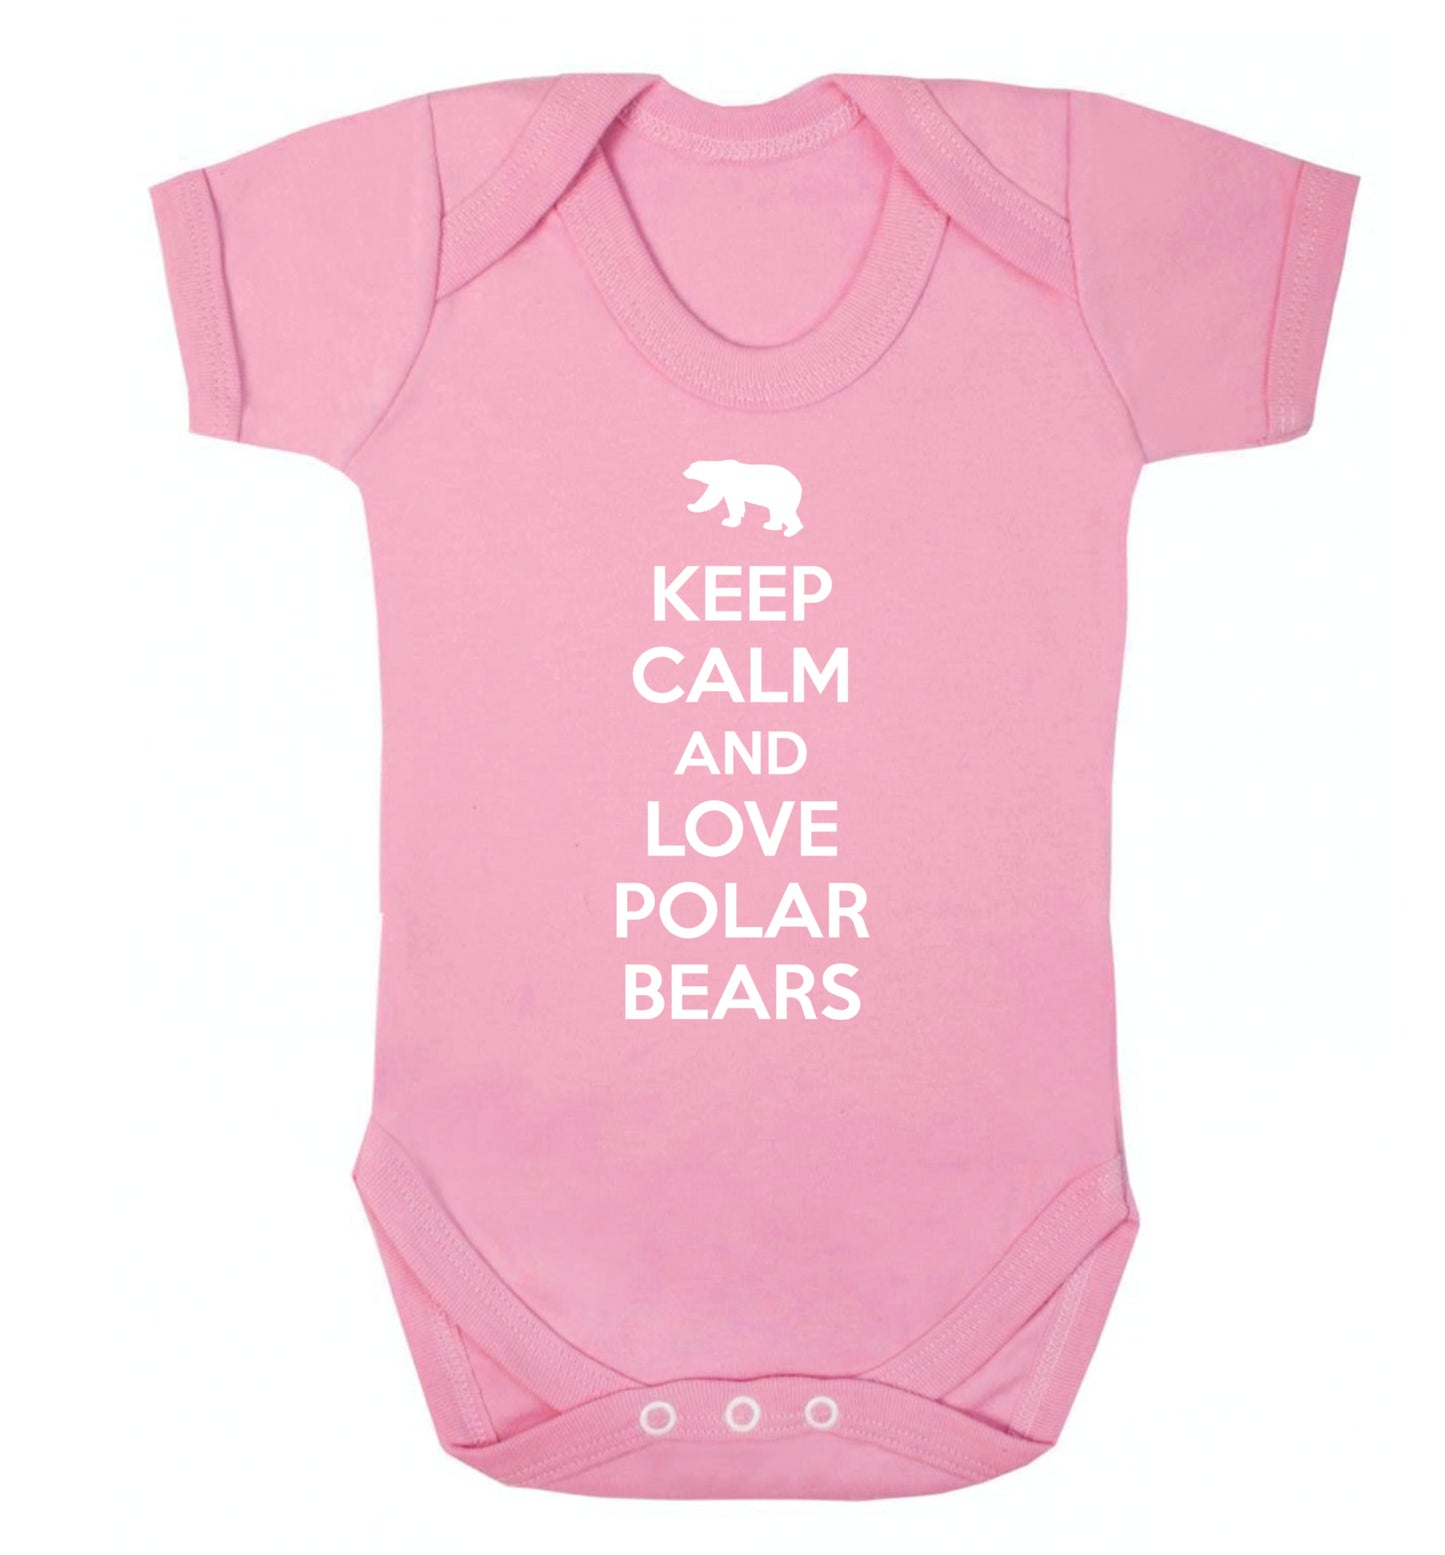 Keep calm and love polar bears Baby Vest pale pink 18-24 months